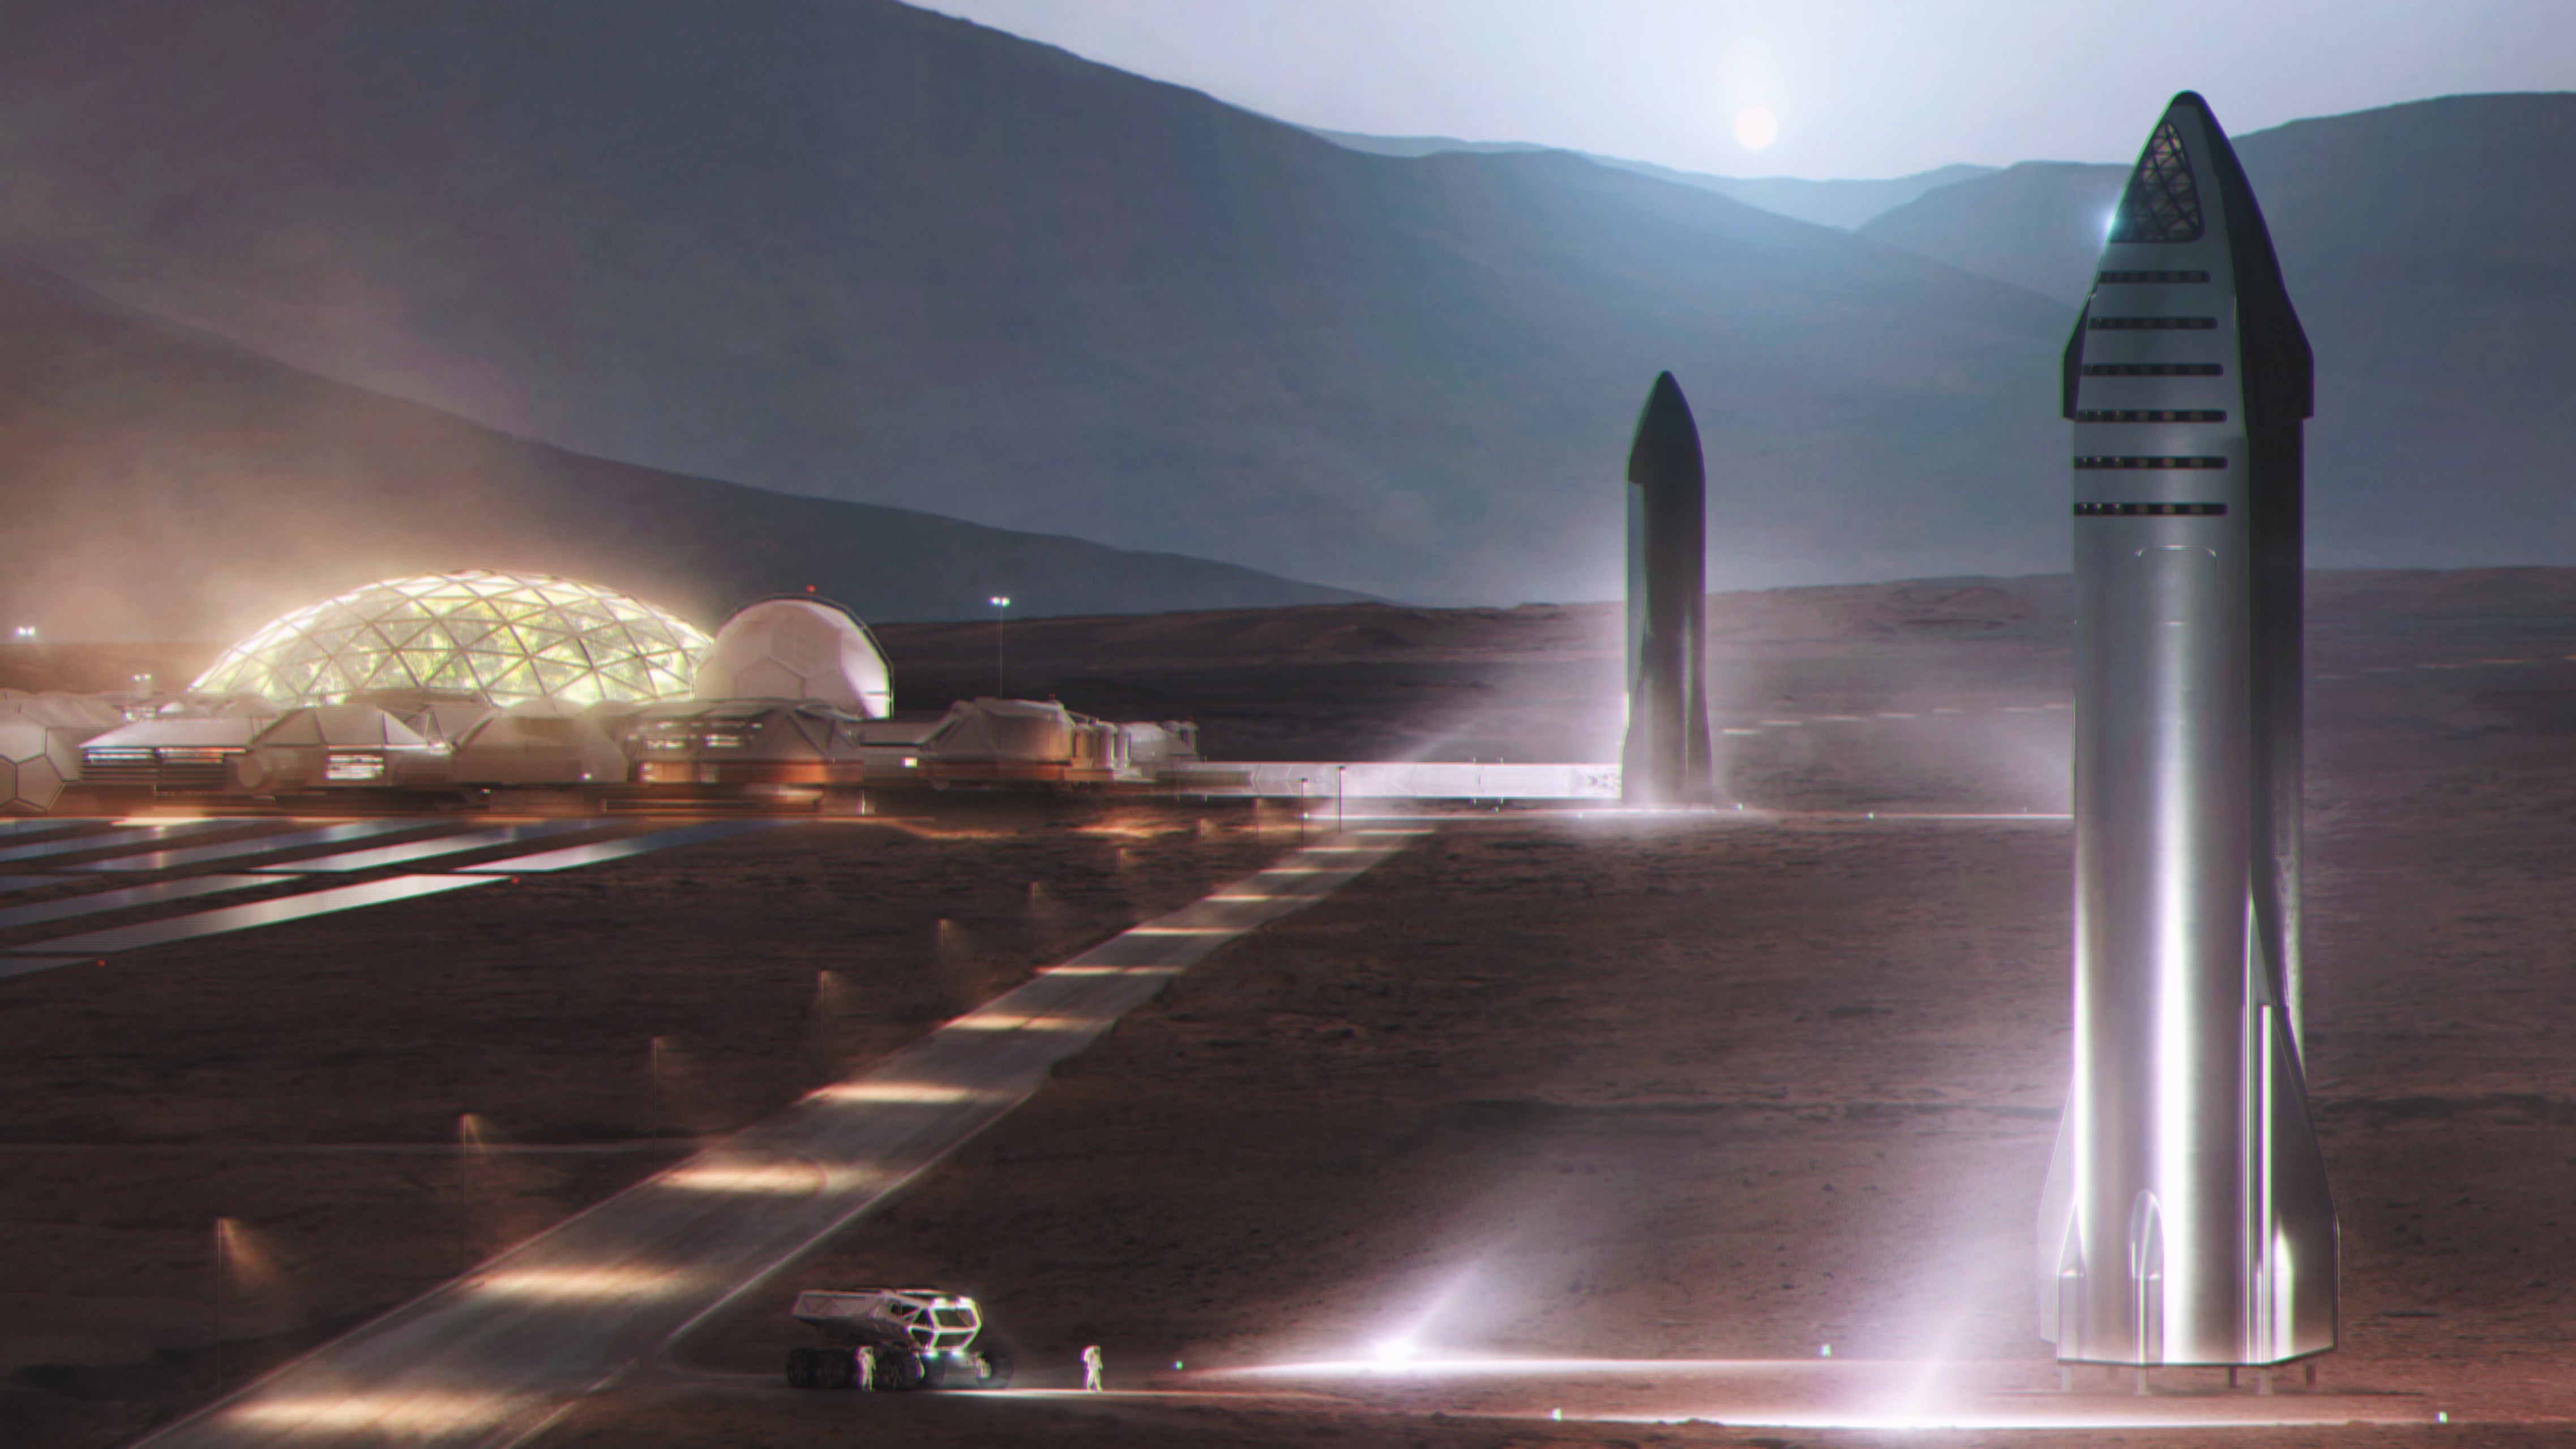 Elon Musk Says SpaceX Aims To Land Humans On Mars In 5 Years Best Case, 10 Years Worst Case